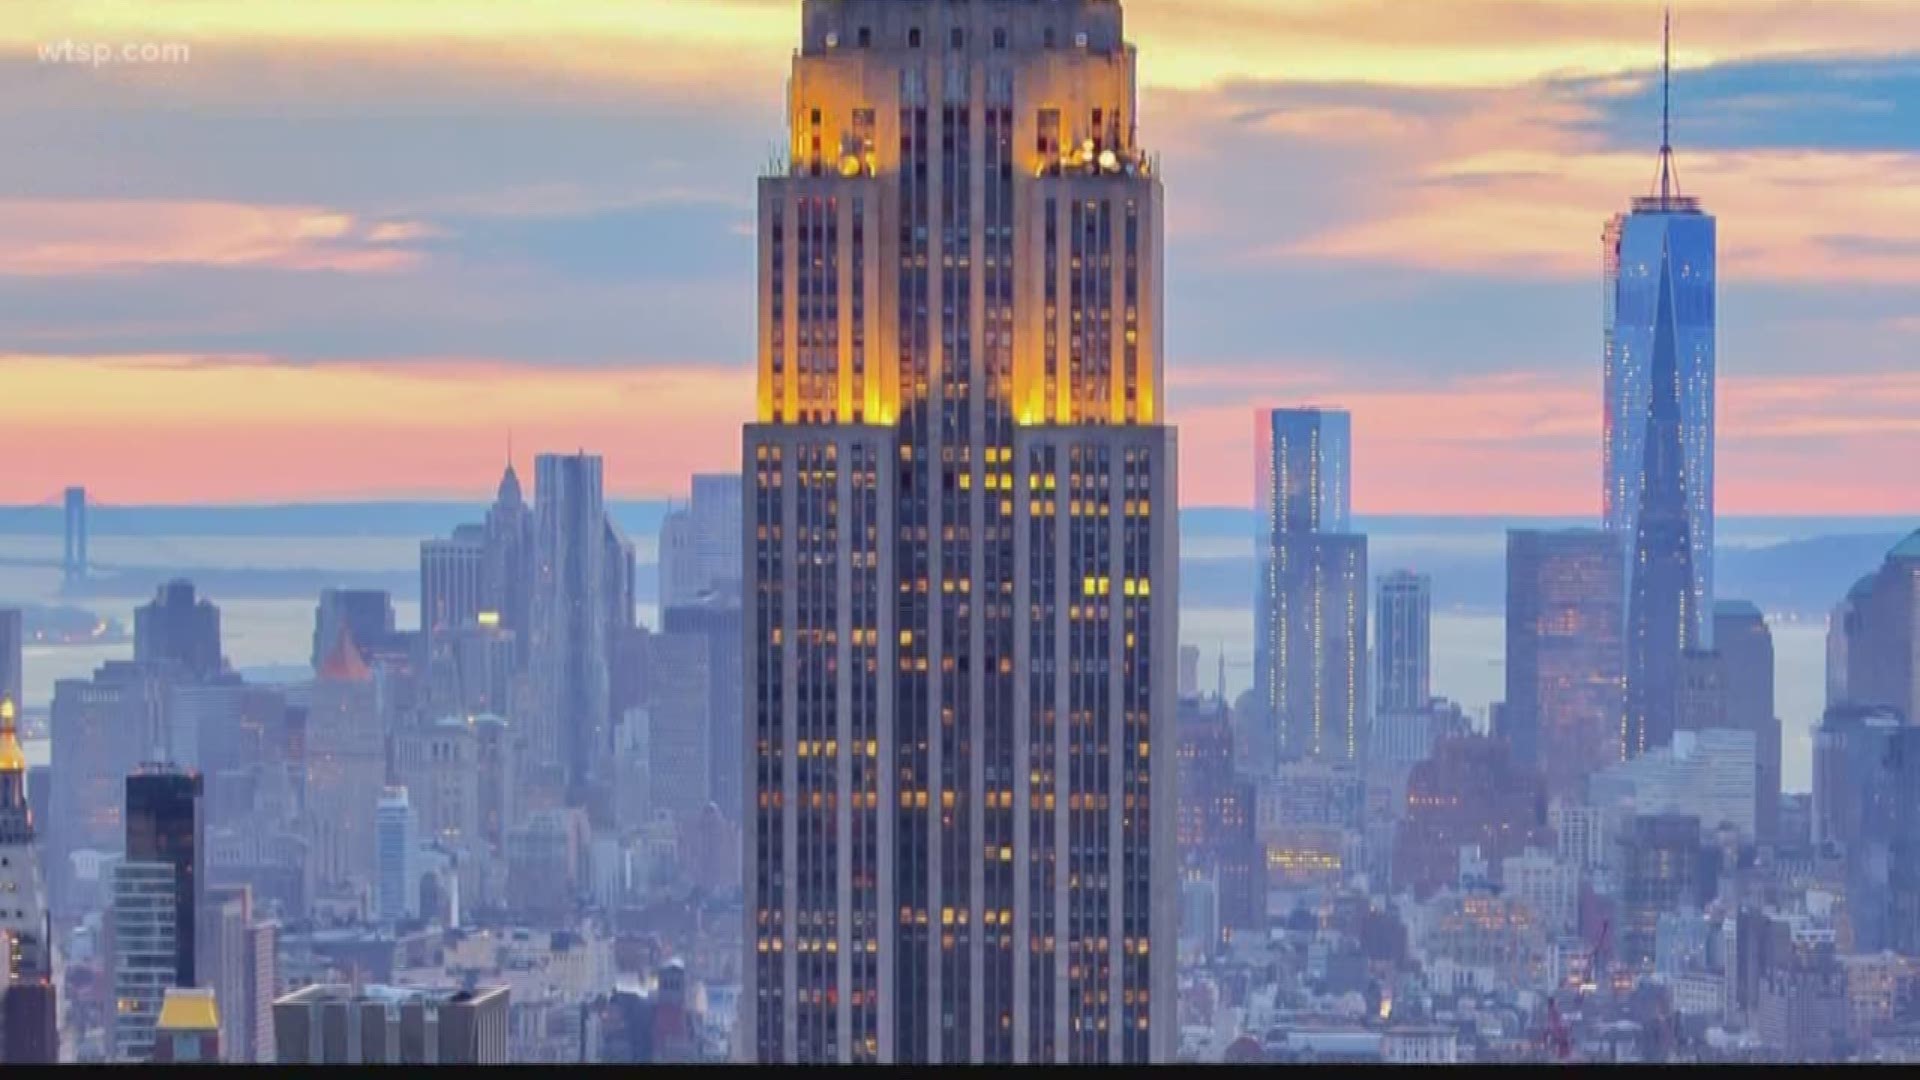 The Empire State Building Run-Up is in its 42nd year. It challenges runners across the world to race up the Empire State Building's 86 floors or 1,576 stairs.